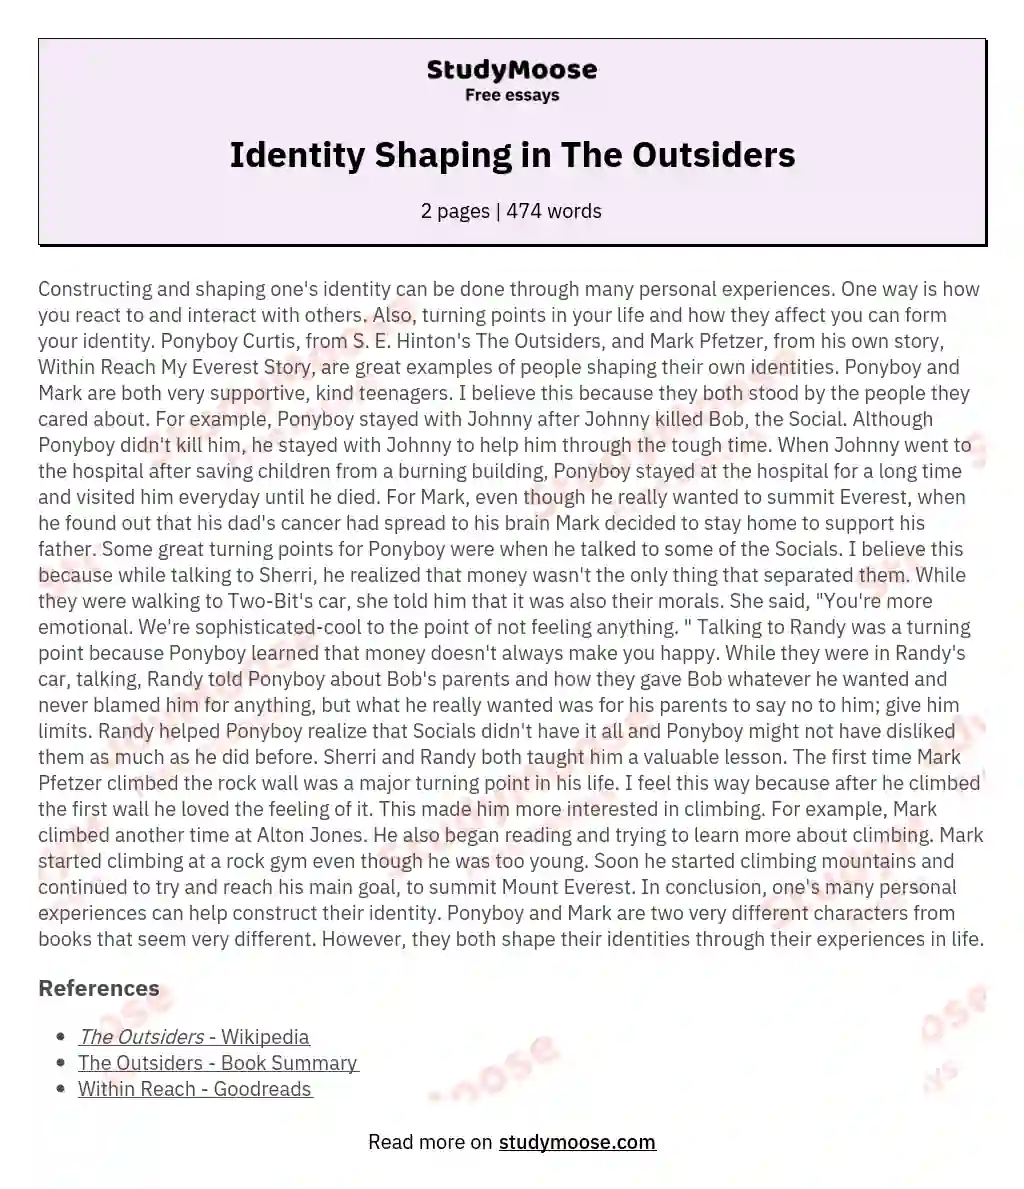 Identity Shaping in The Outsiders